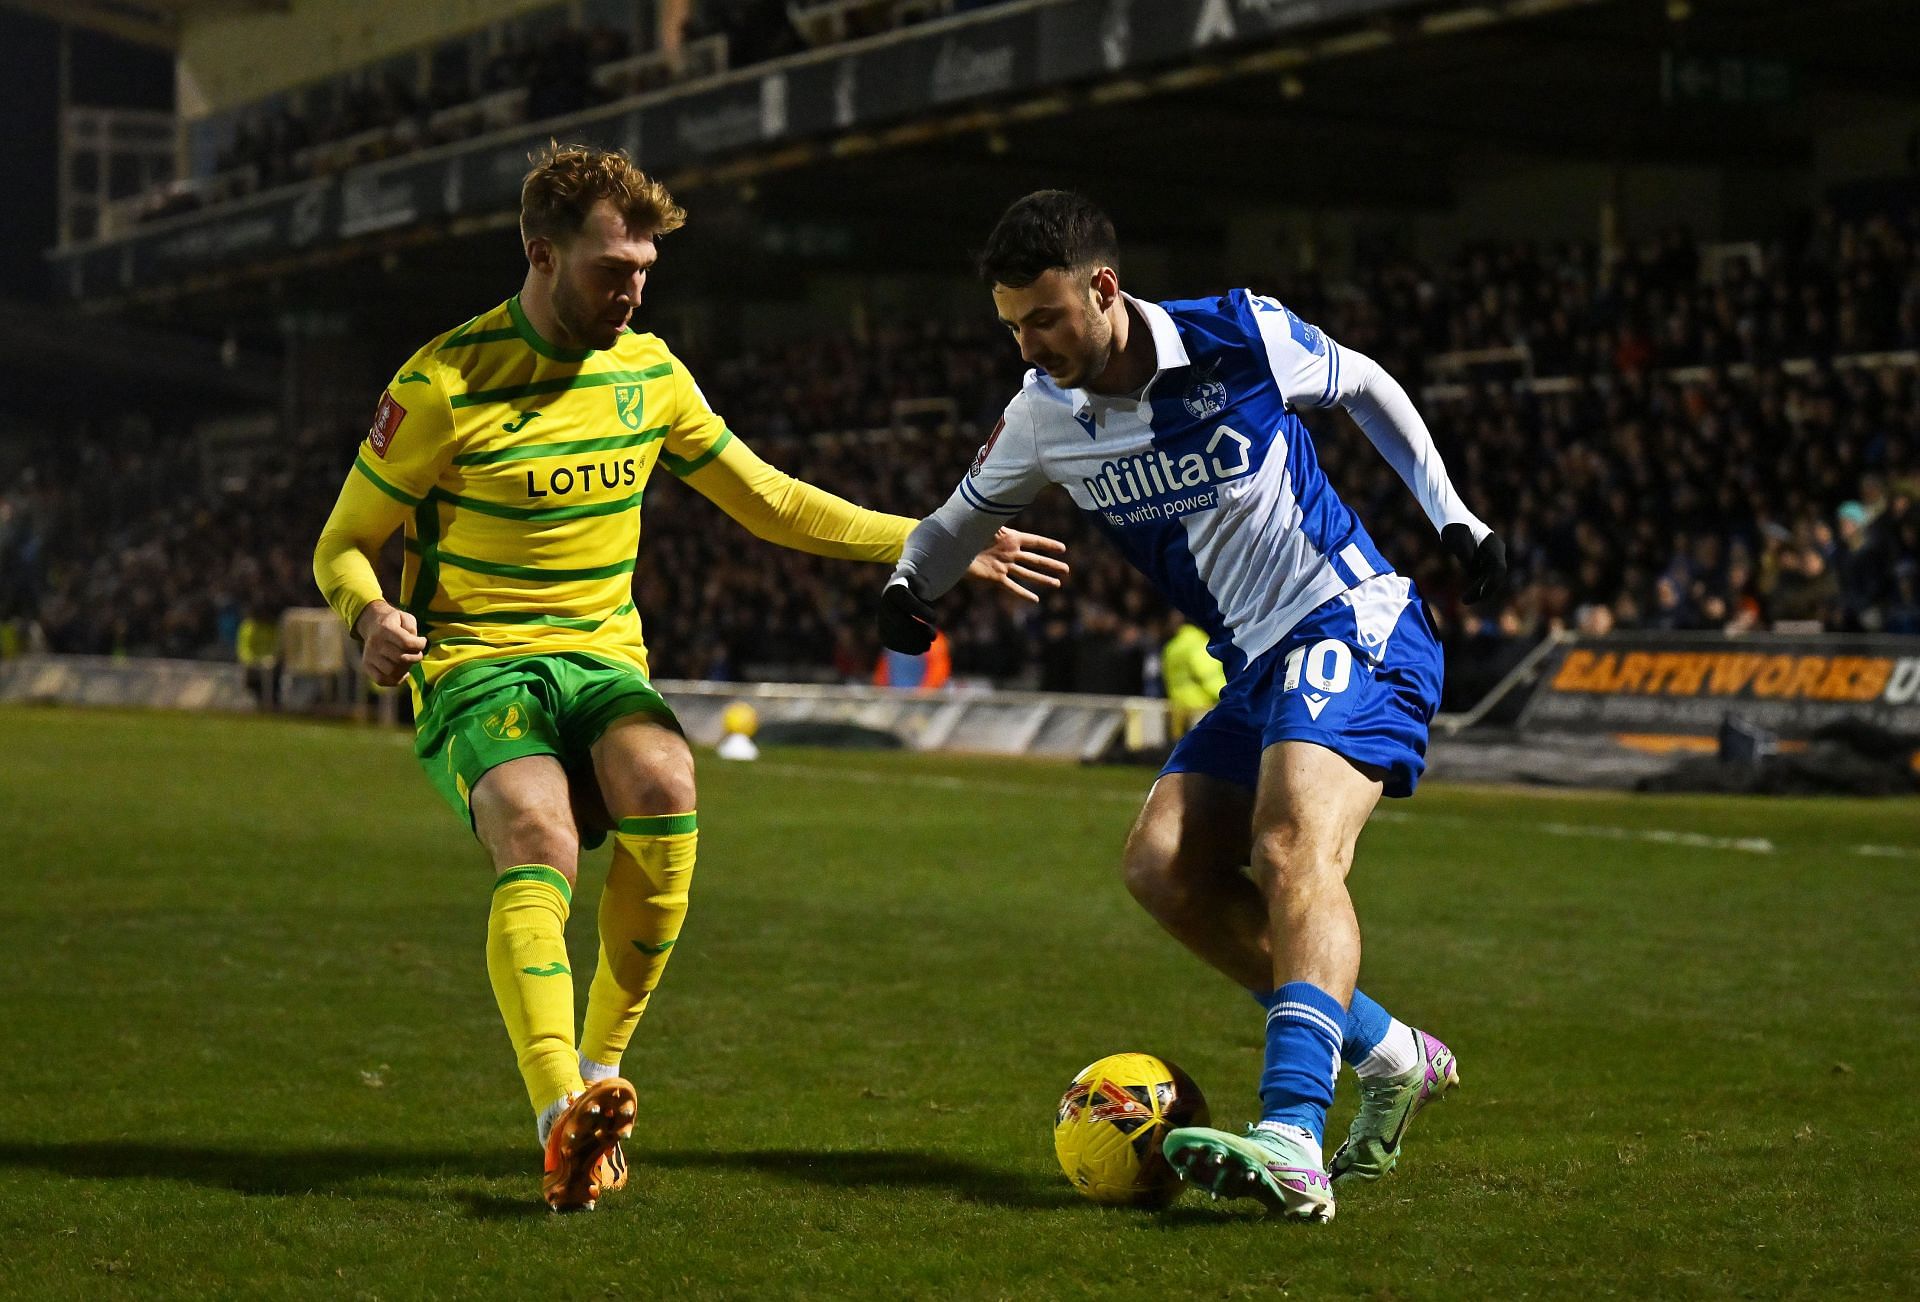 Bristol Rovers v Norwich City - Emirates FA Cup Third Round Replay